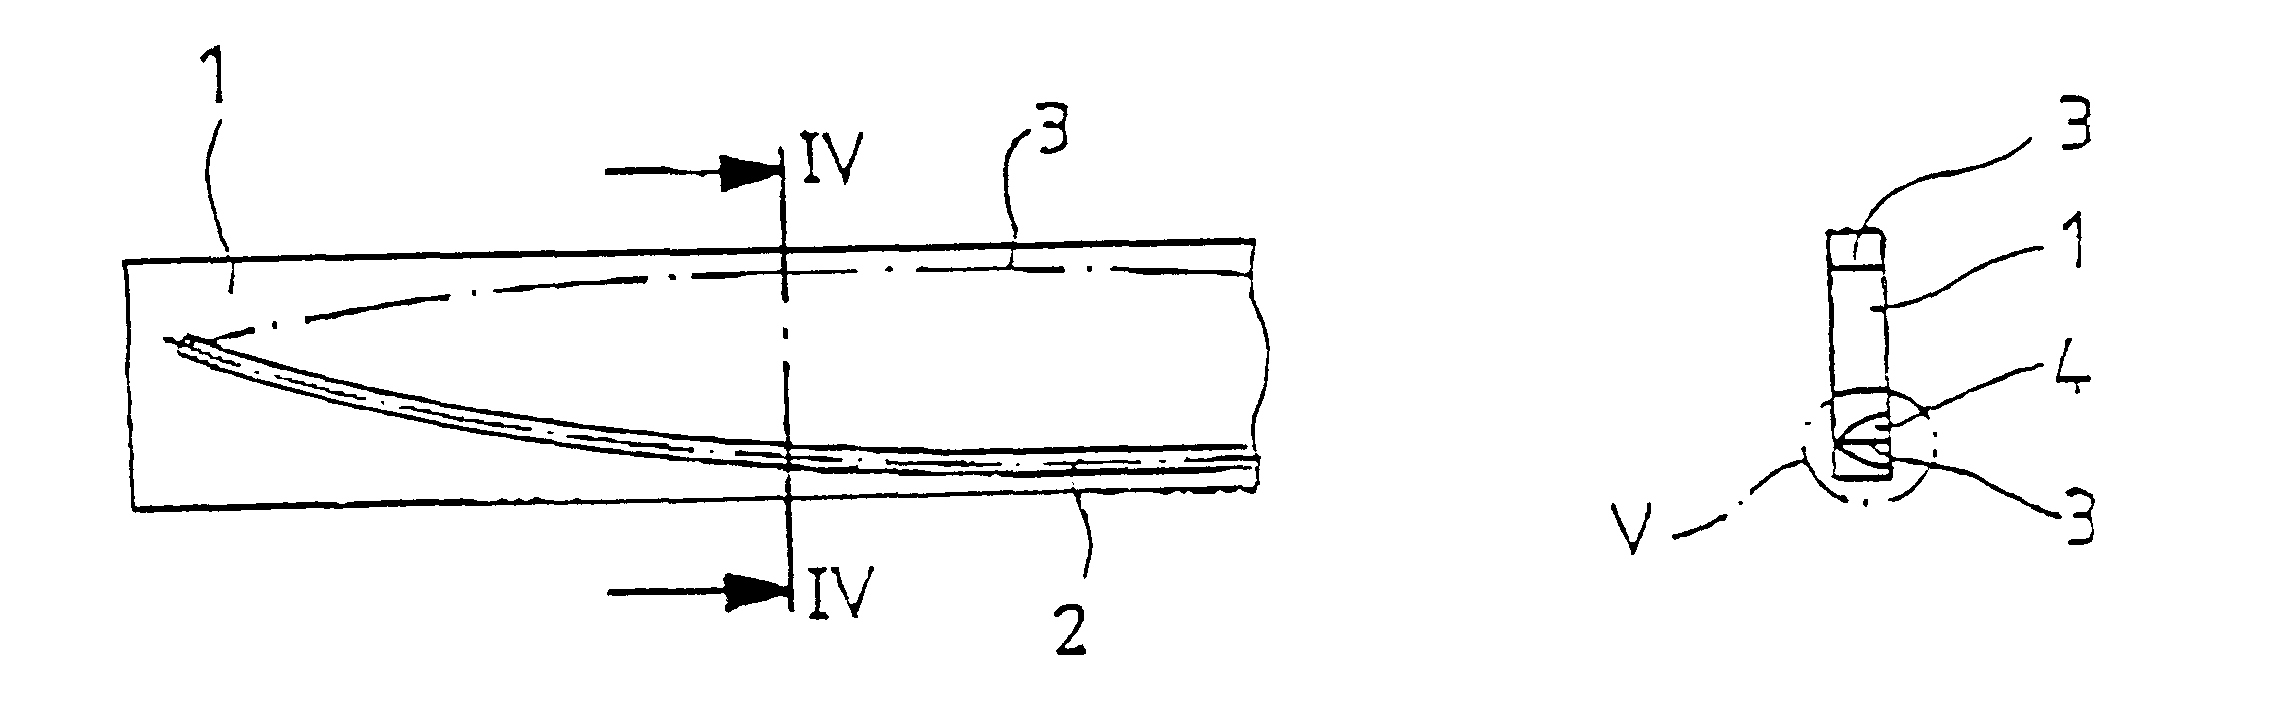 Process for manufacturing a blade of a cutting tool and product manufactured therewith